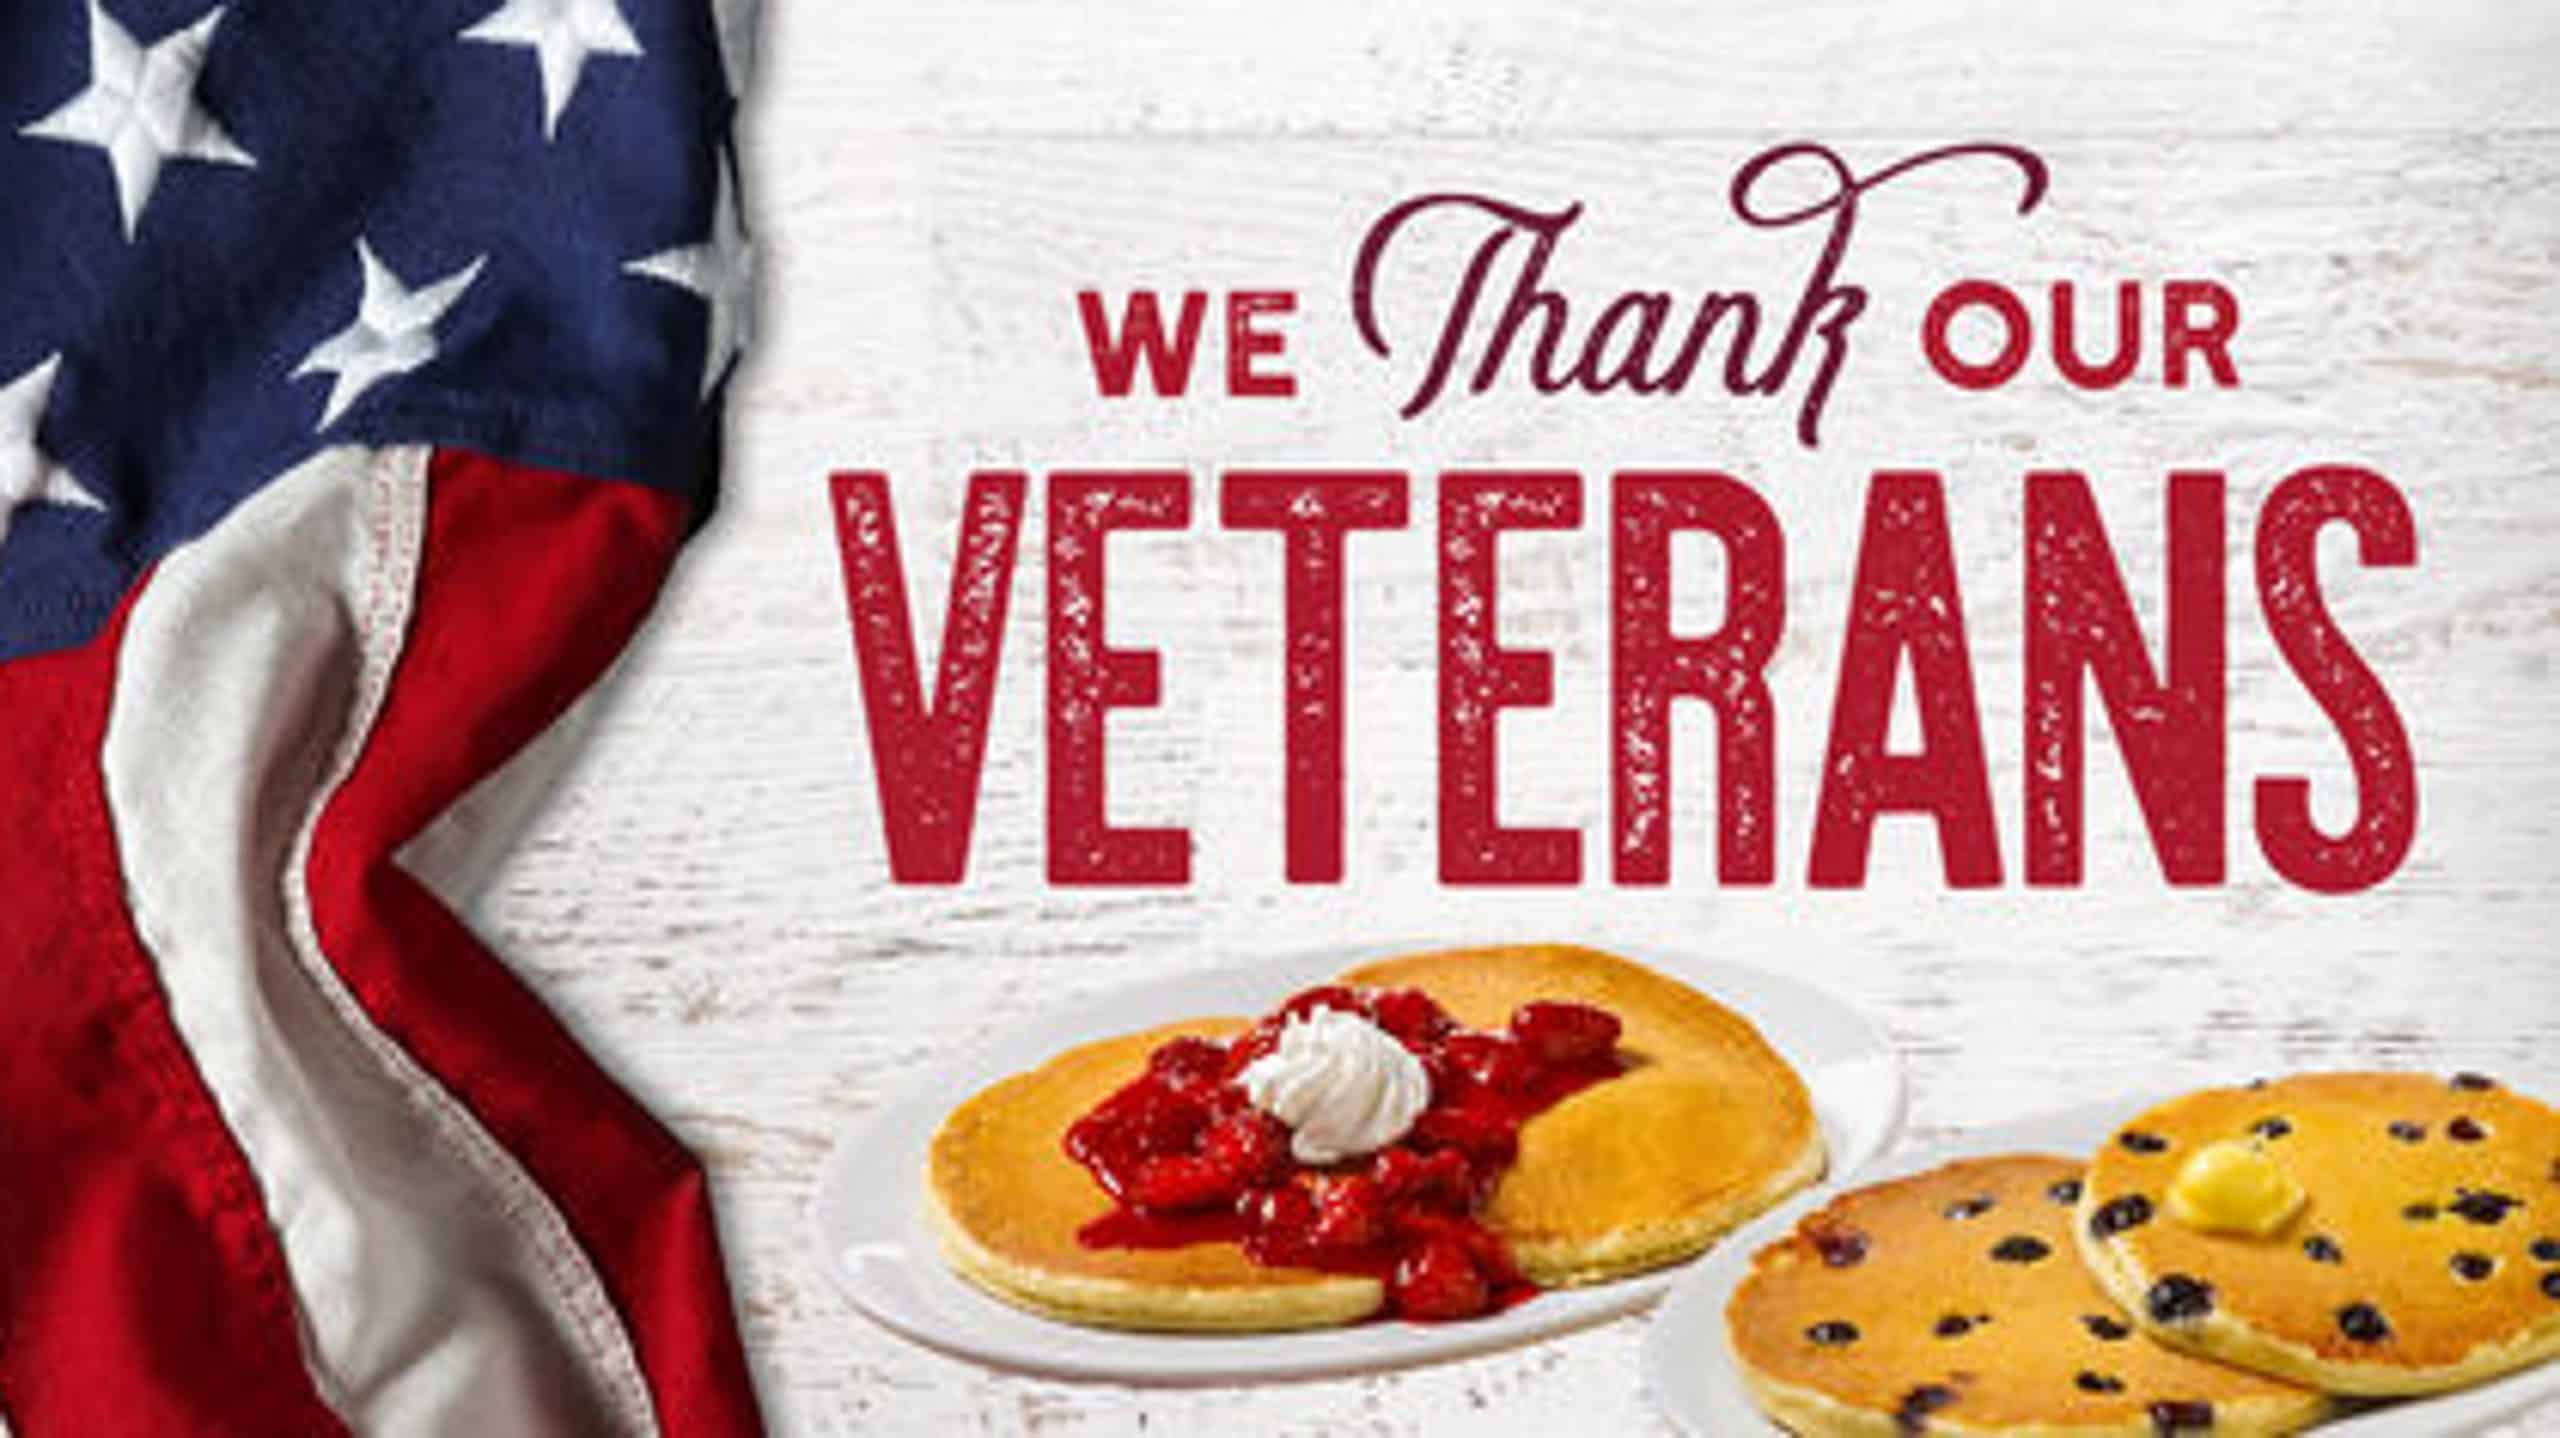 Veterans Day free meals 2018: Freebies, deals and discounts